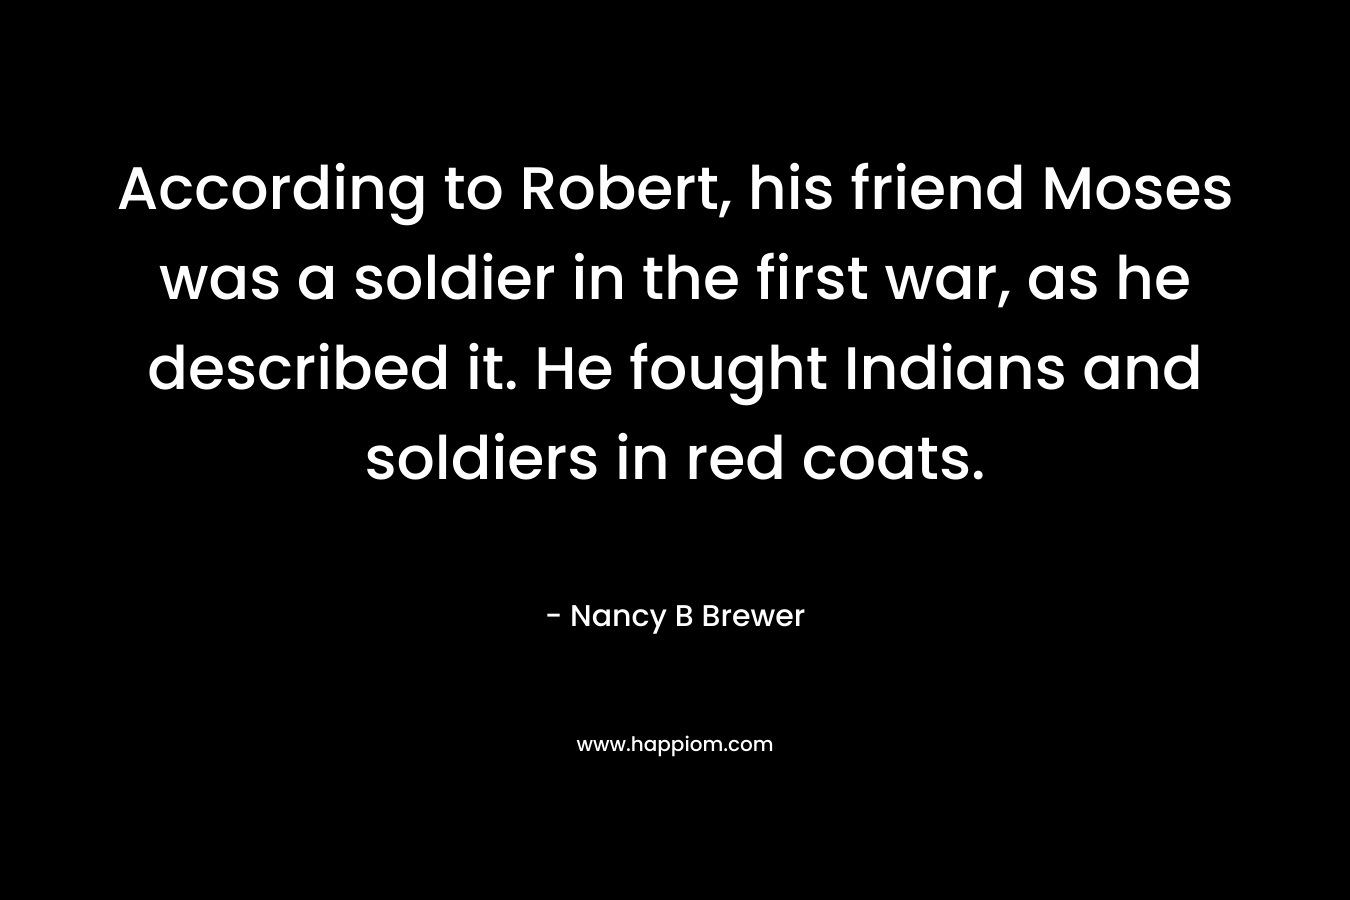 According to Robert, his friend Moses was a soldier in the first war, as he described it. He fought Indians and soldiers in red coats.